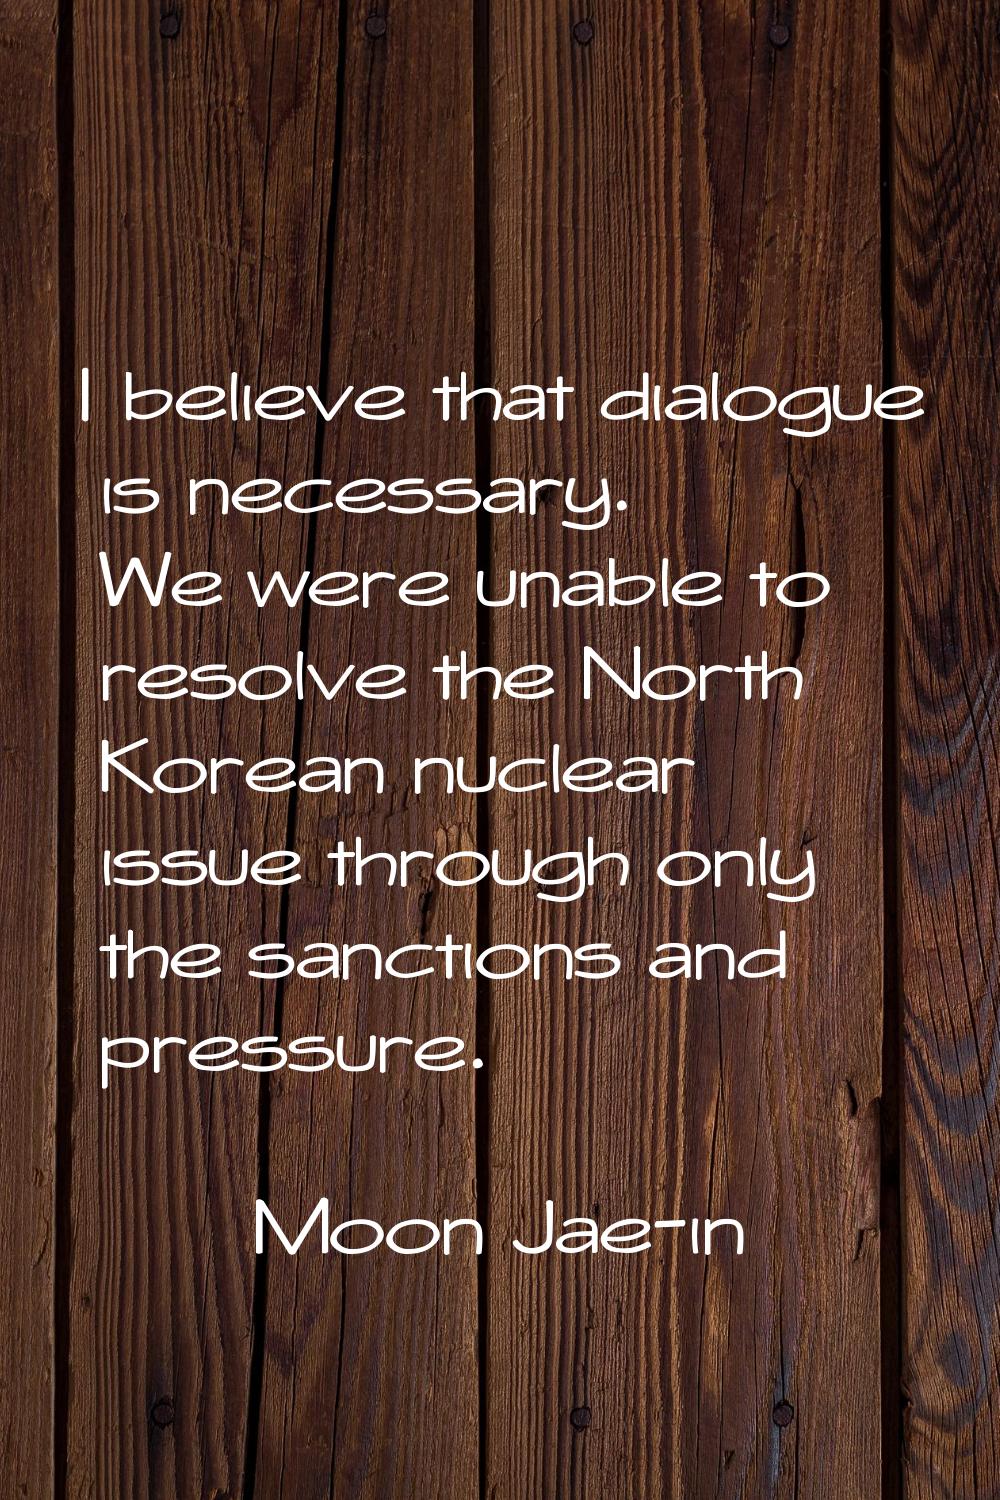 I believe that dialogue is necessary. We were unable to resolve the North Korean nuclear issue thro